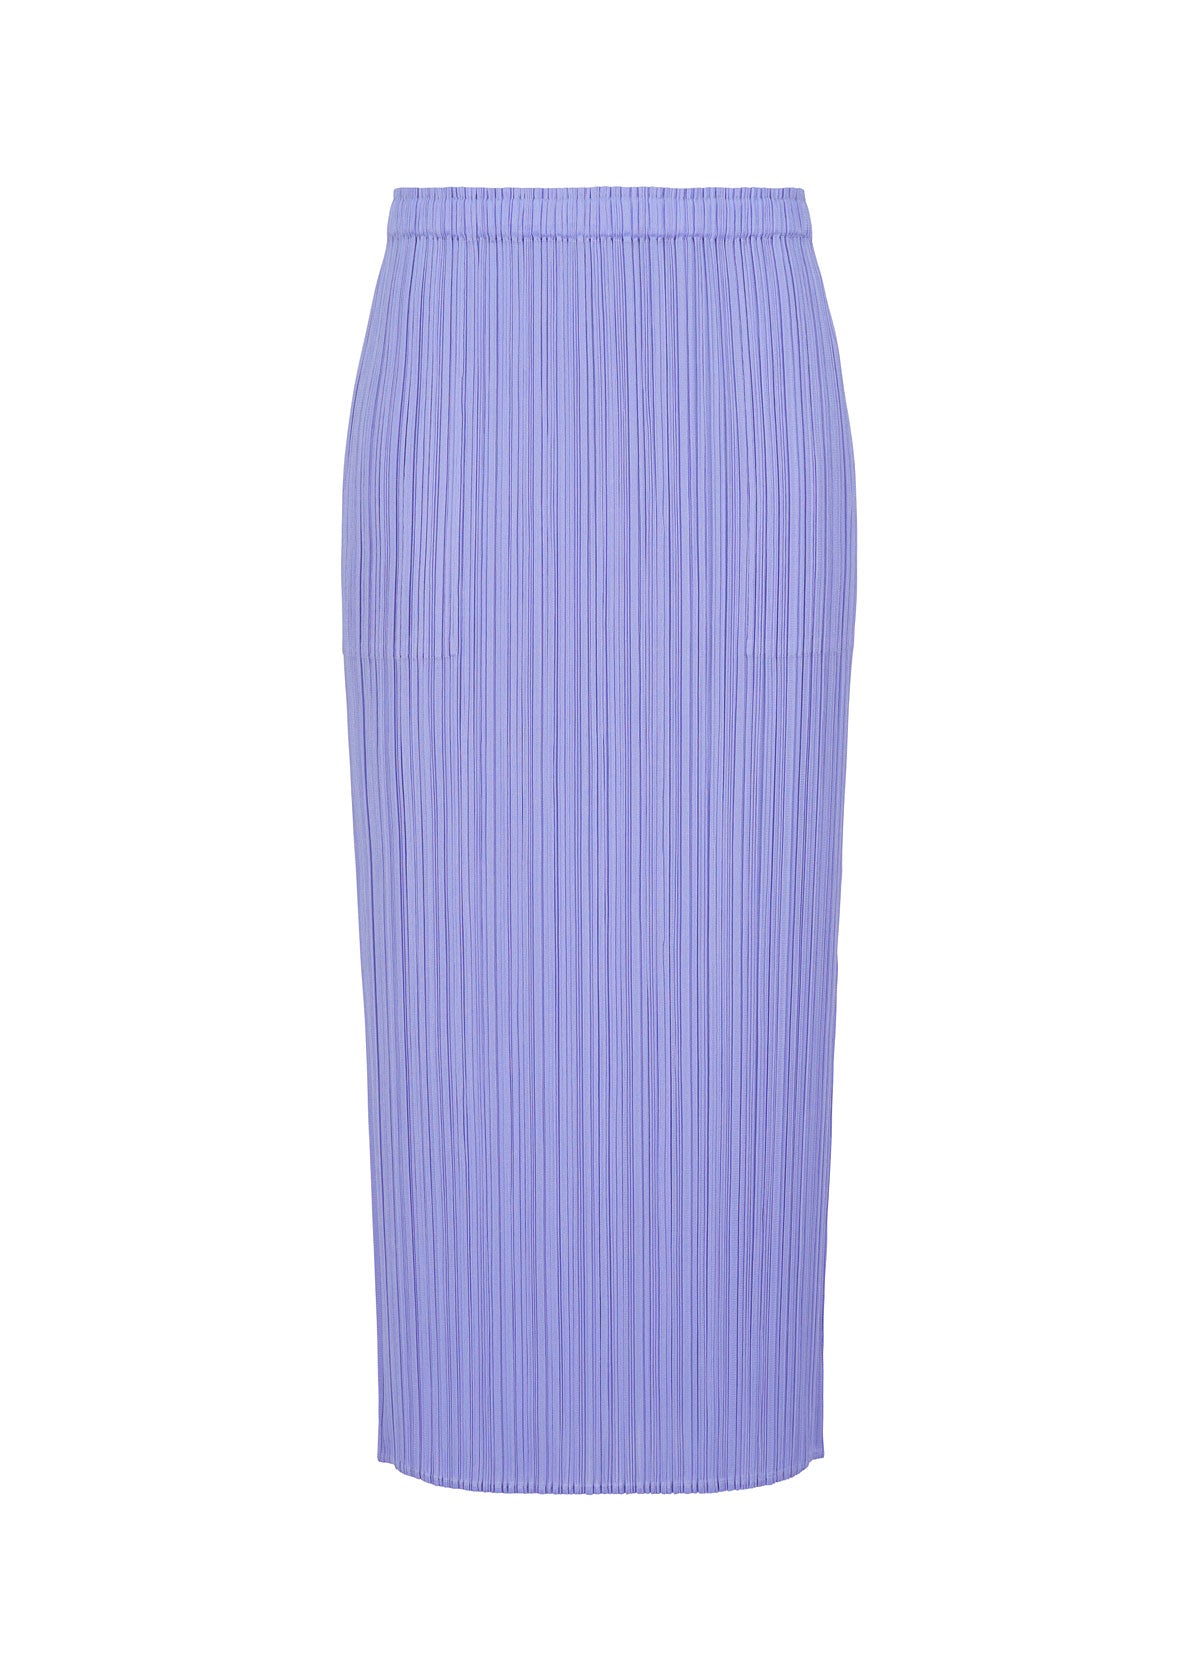 NEW COLORFUL BASICS 3 SKIRT | The official ISSEY MIYAKE ONLINE 